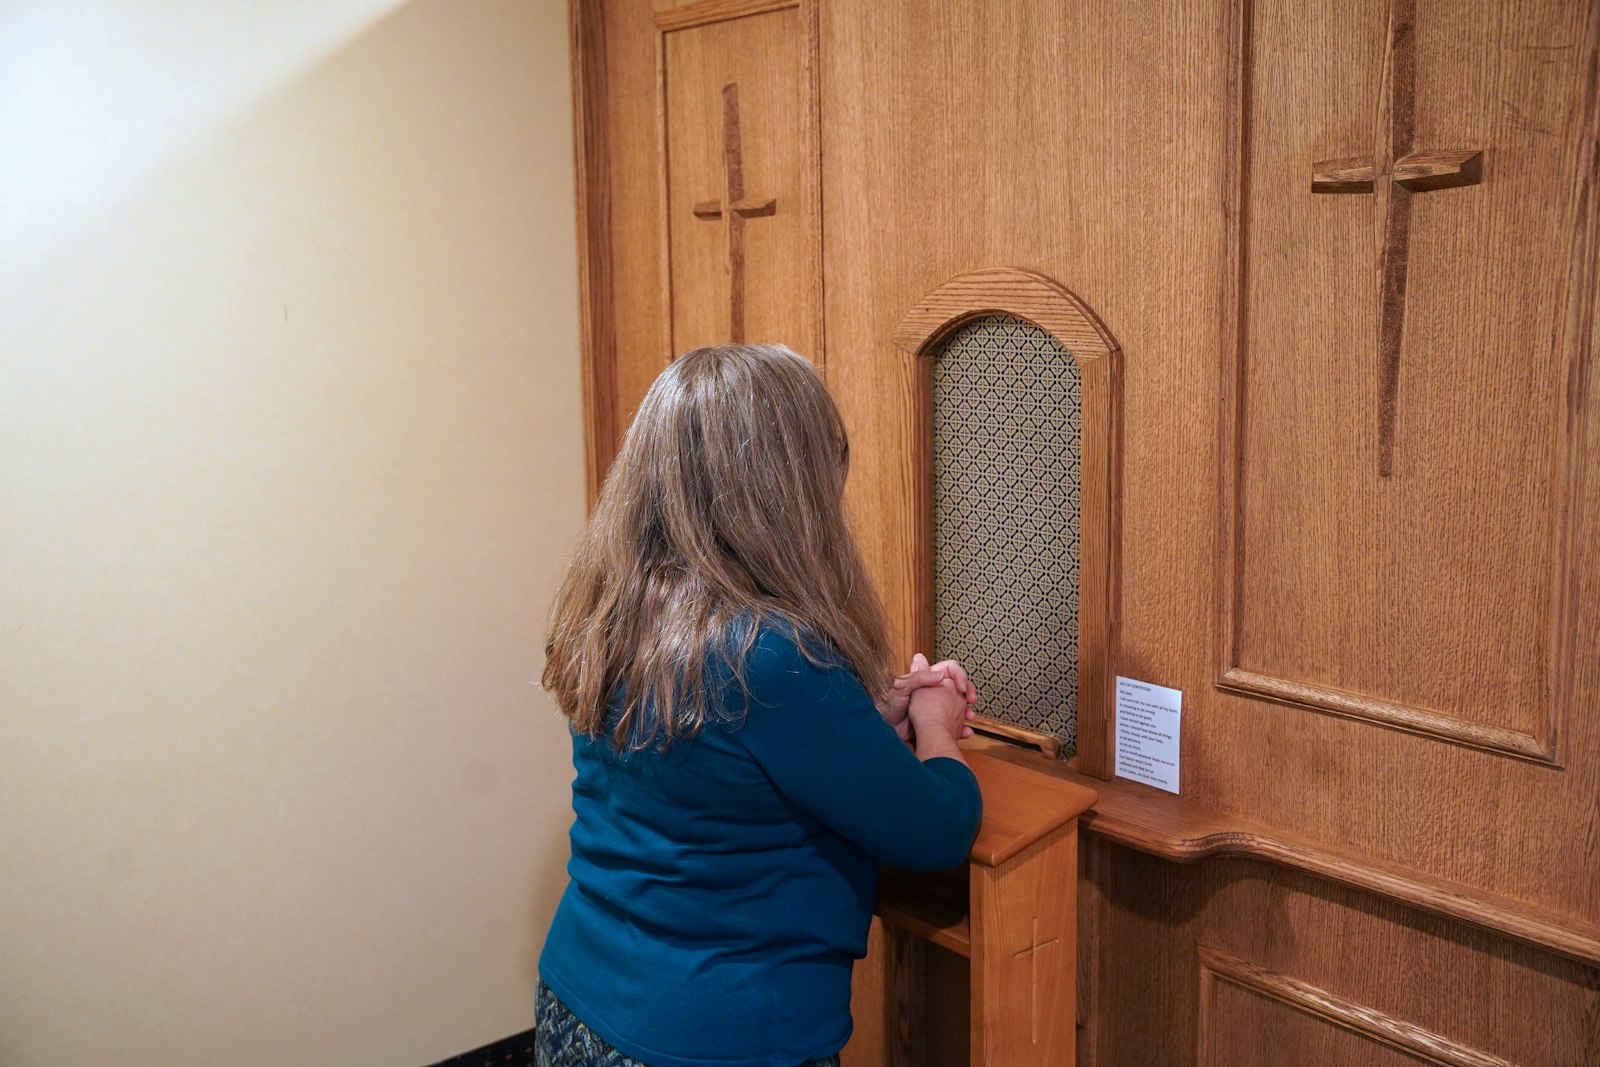 A woman kneels behind the screen at Prince of Peace Parish's new confessional in this staged photo. Fr. Dawson reached out to Tom Oulette, grand knight of Knights of Columbus Council 13362 at St. Fabian Parish in Farmington Hills, to build a new confessional screen that had a more permanent, reverent look.